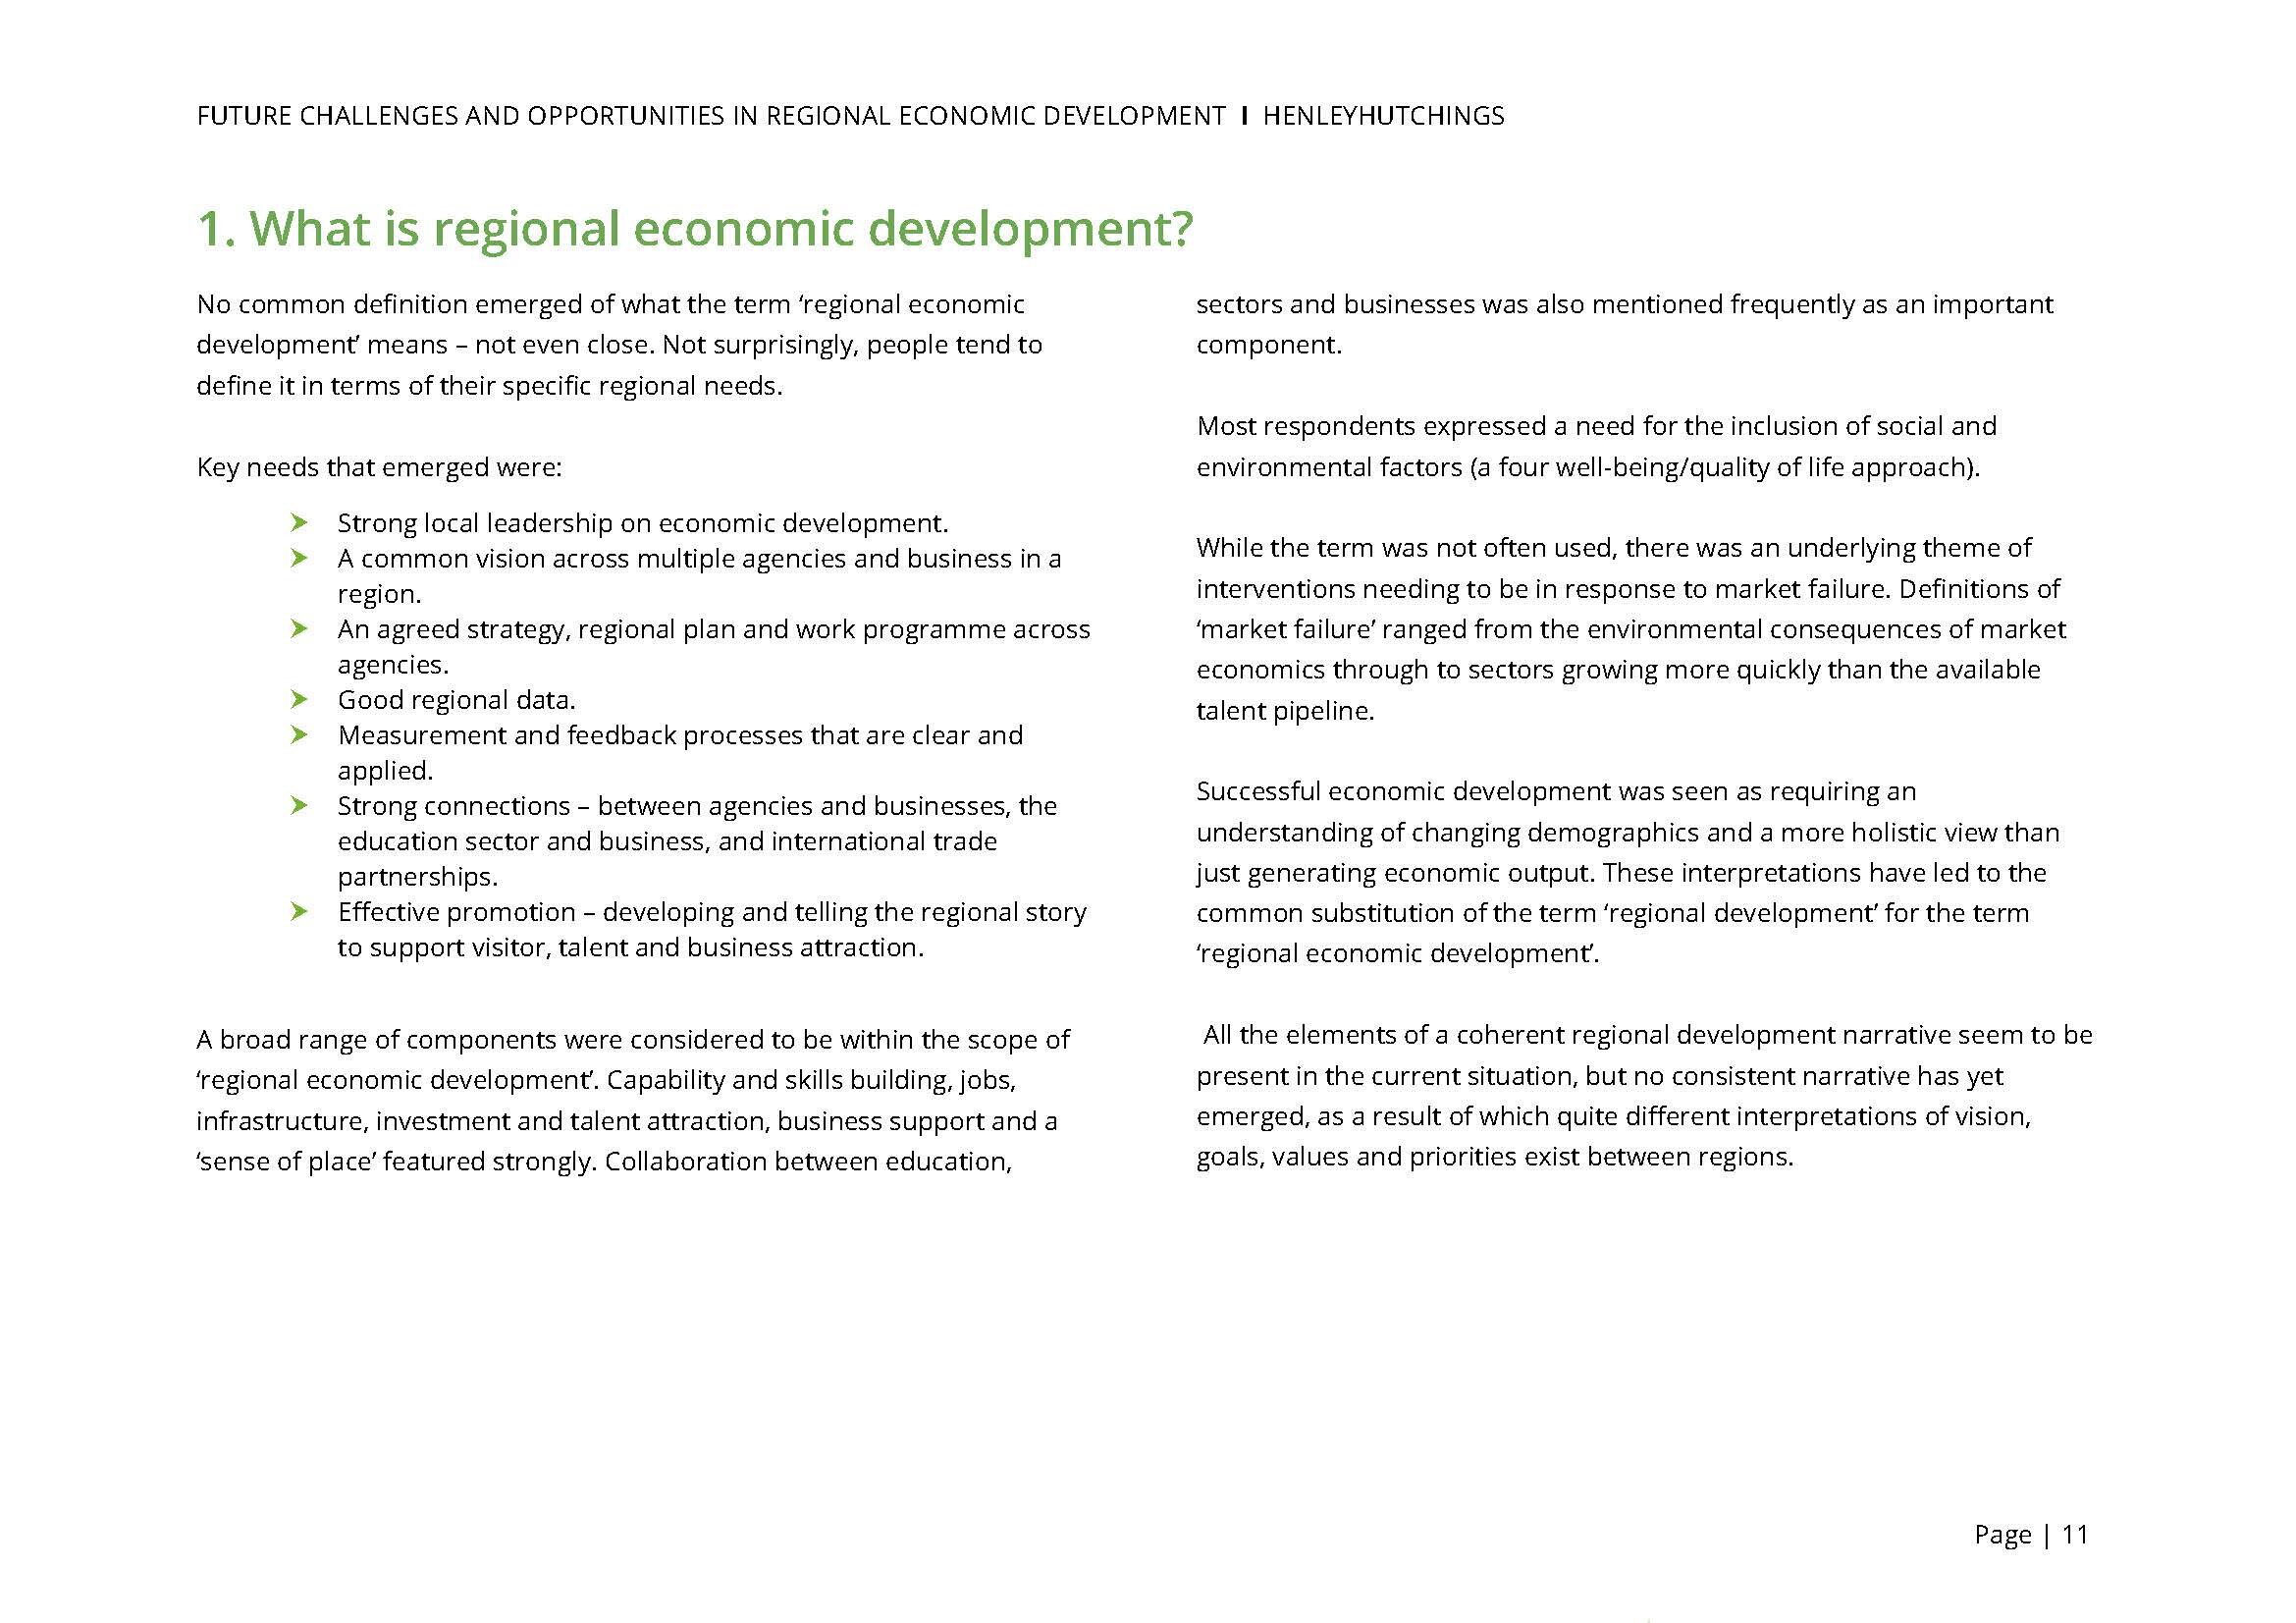 Future Challenges and Opportunities in Economic Development, HenleyHutchings TEST_Page_11.jpg